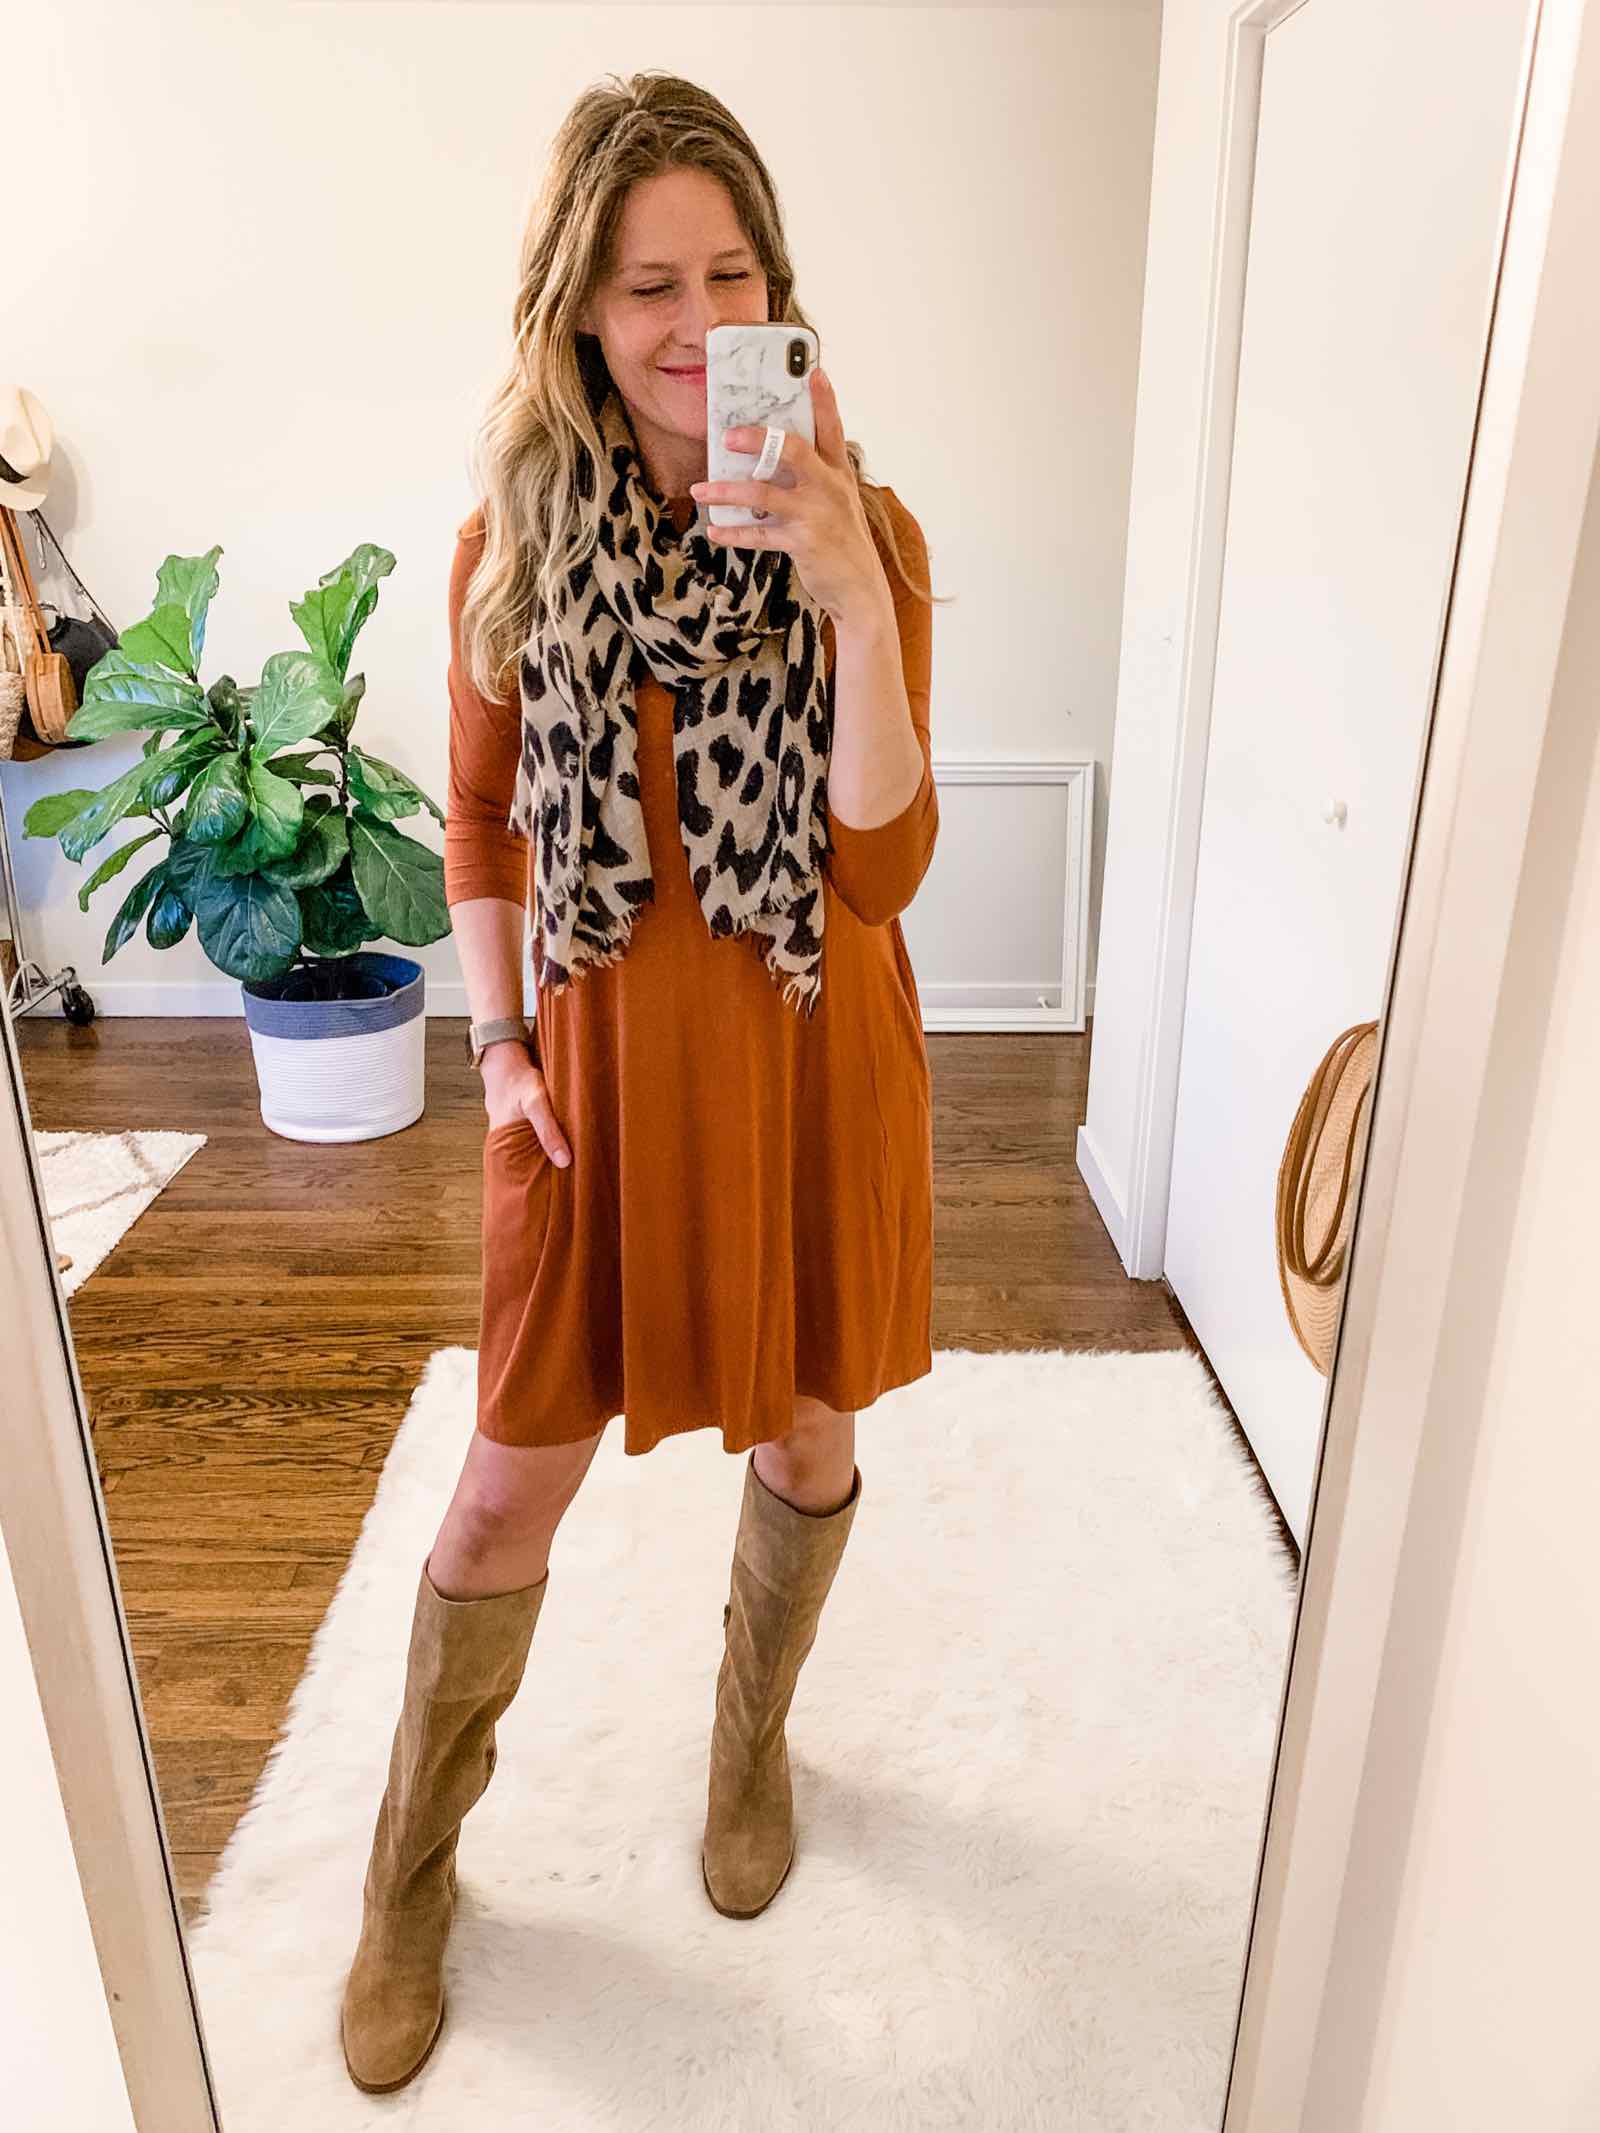 Love this kind of dress for fall! So easy to style